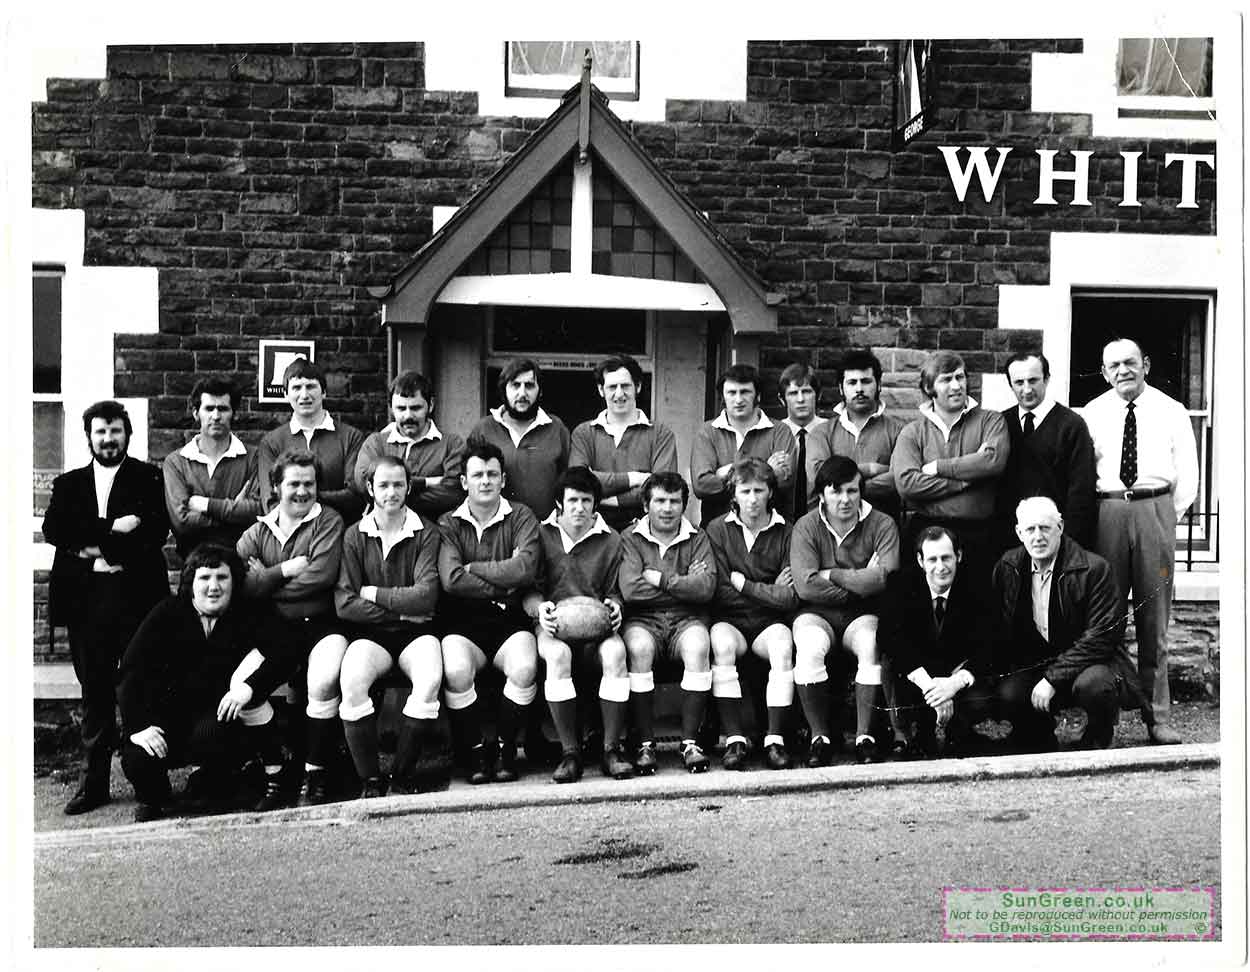 A photo of the Yorkley rugby team from the early 1970's.